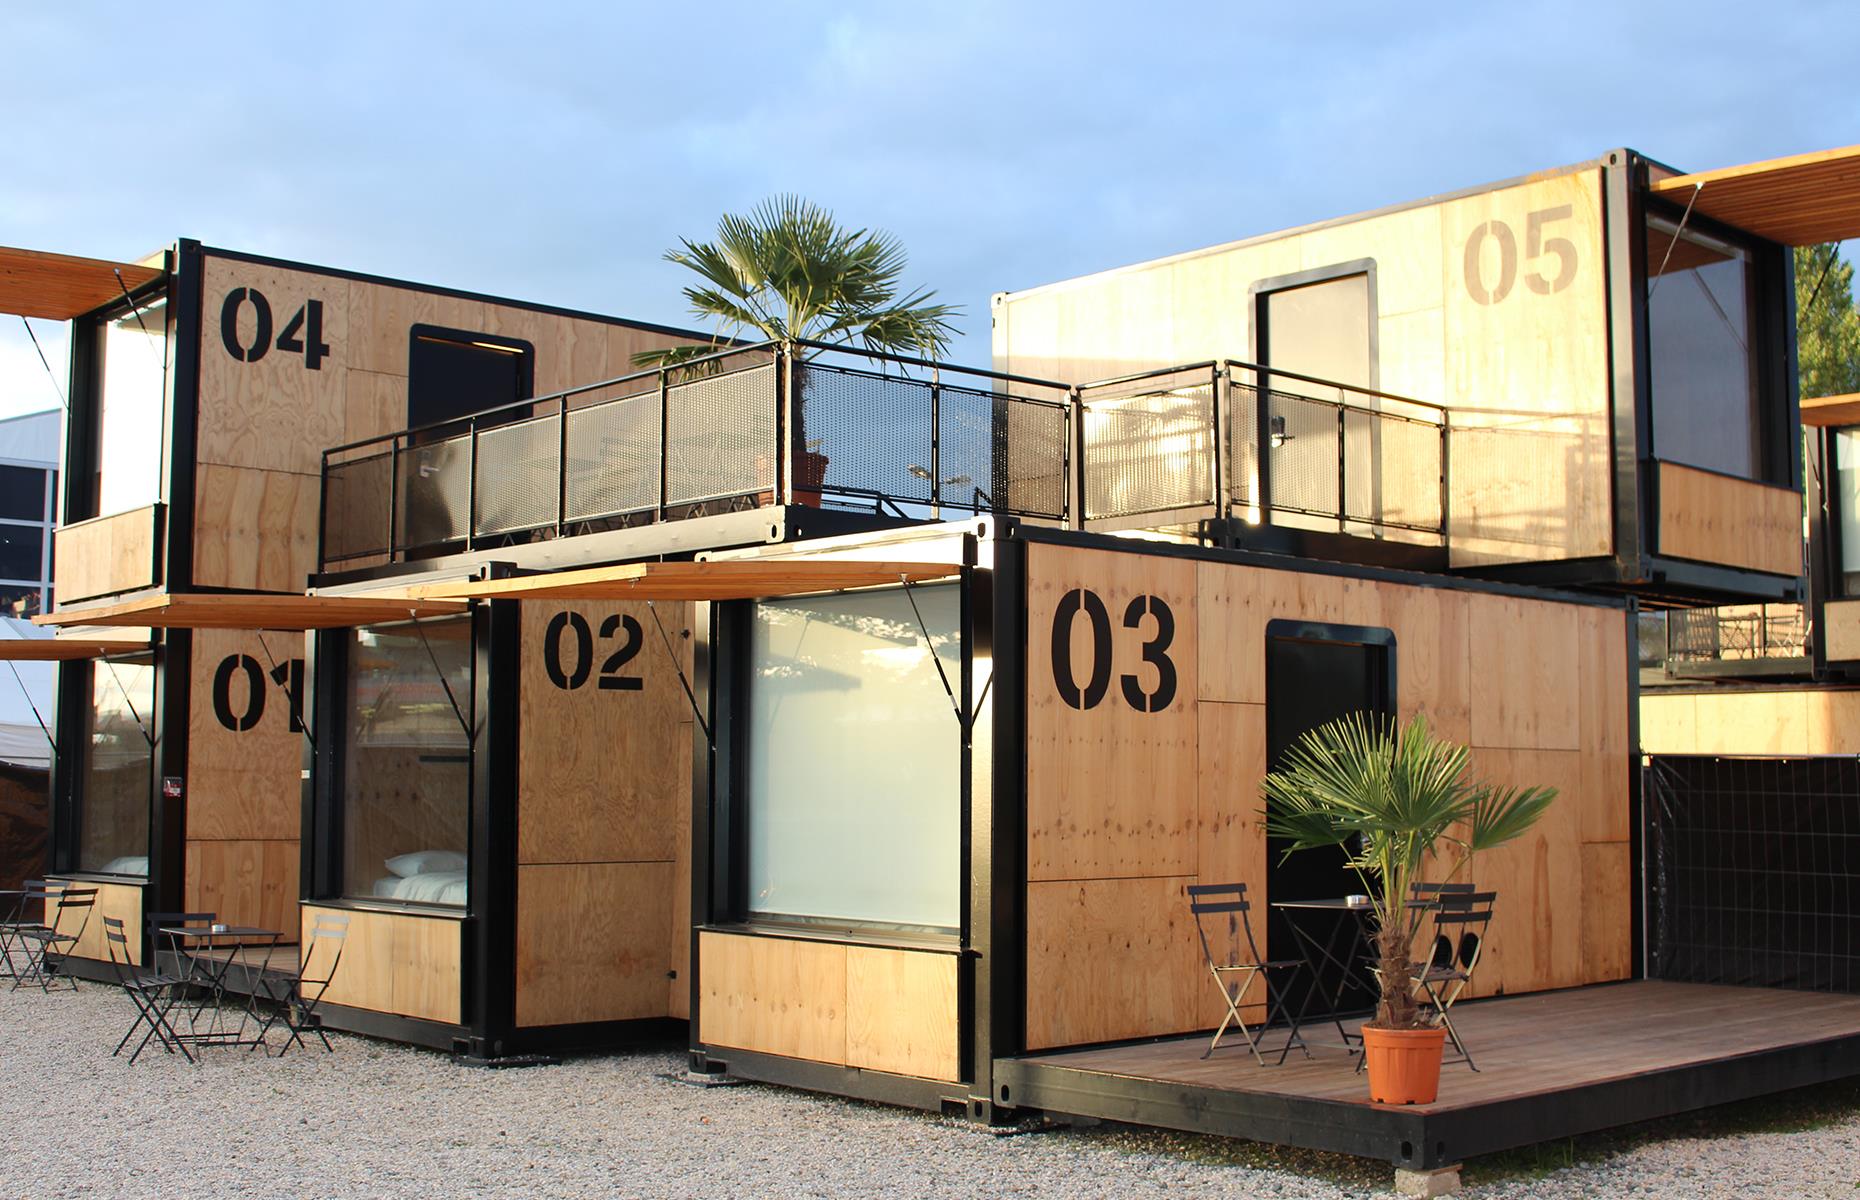 <p>Imagine a hotel that can simply be picked up and moved on to a new location: that’s the USP of the Flying Nest, the brainchild of French hospitality group Accor. Slick guestrooms are housed within converted marine containers that can be shifted and assembled at the drop of a hat. So far the hotel has popped up at a beach, a festival and a ski resort in the French Alps. </p>  <p><a href="https://www.loveexploring.com/gallerylist/79834/most-unusual-places-to-stay-in-the-world"><strong>See more unusual places to stay around the world here</strong></a></p>